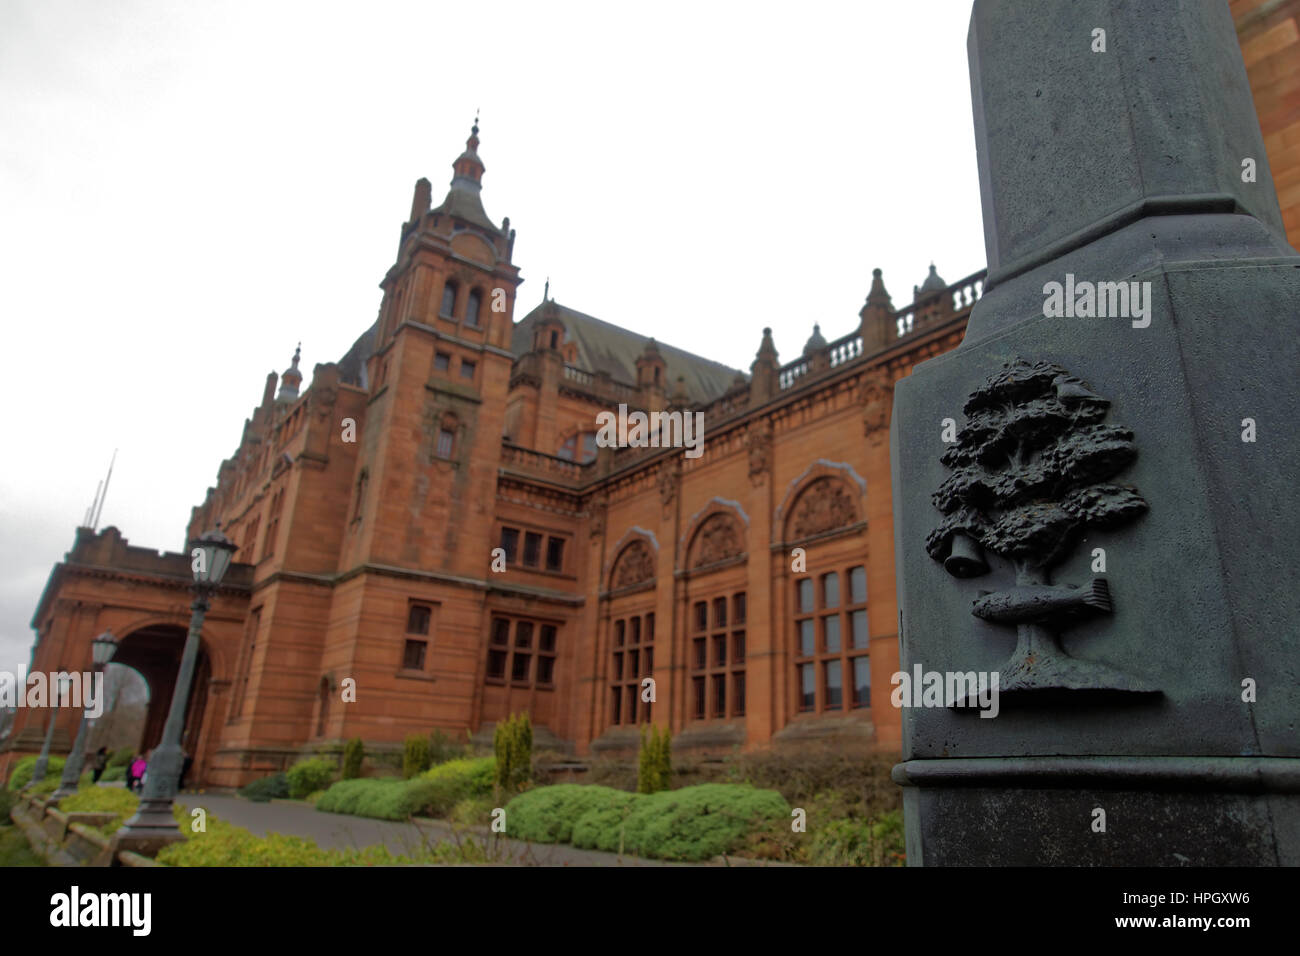 Kelvingrove Art Gallery and Museum viewed from Glasgow coat of arms on a lamppost Stock Photo